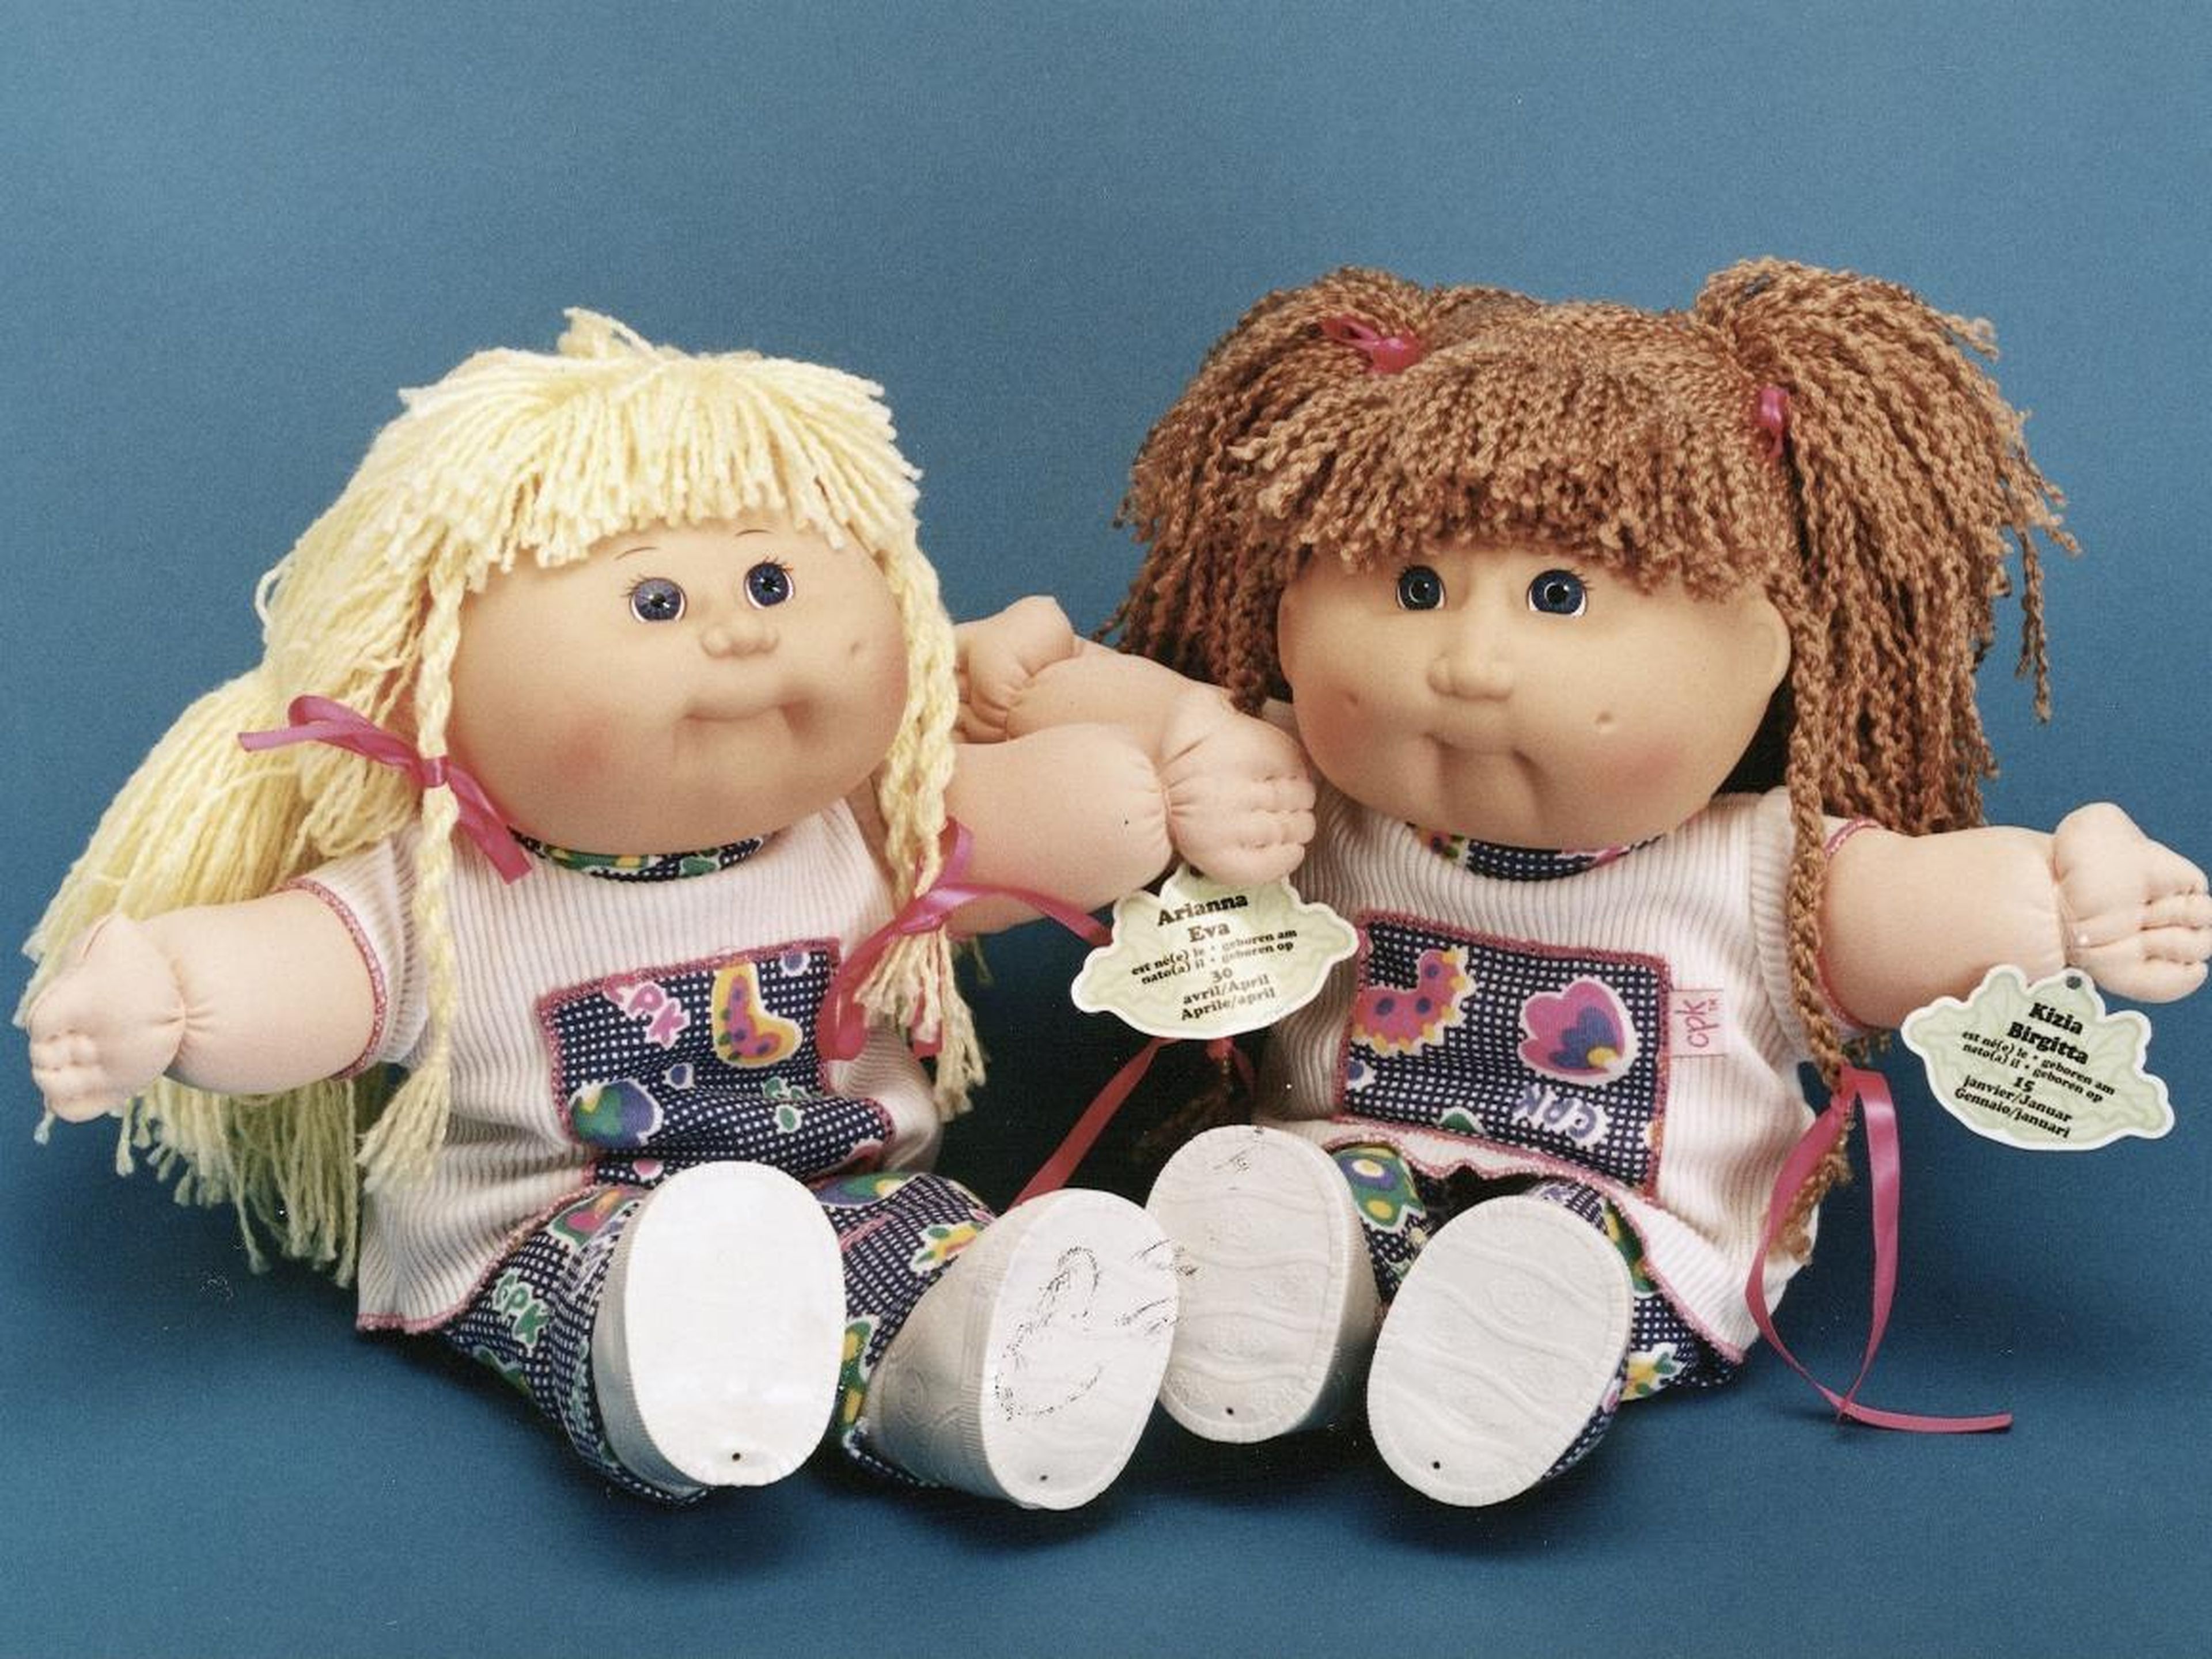 1983: Cabbage Patch Kids